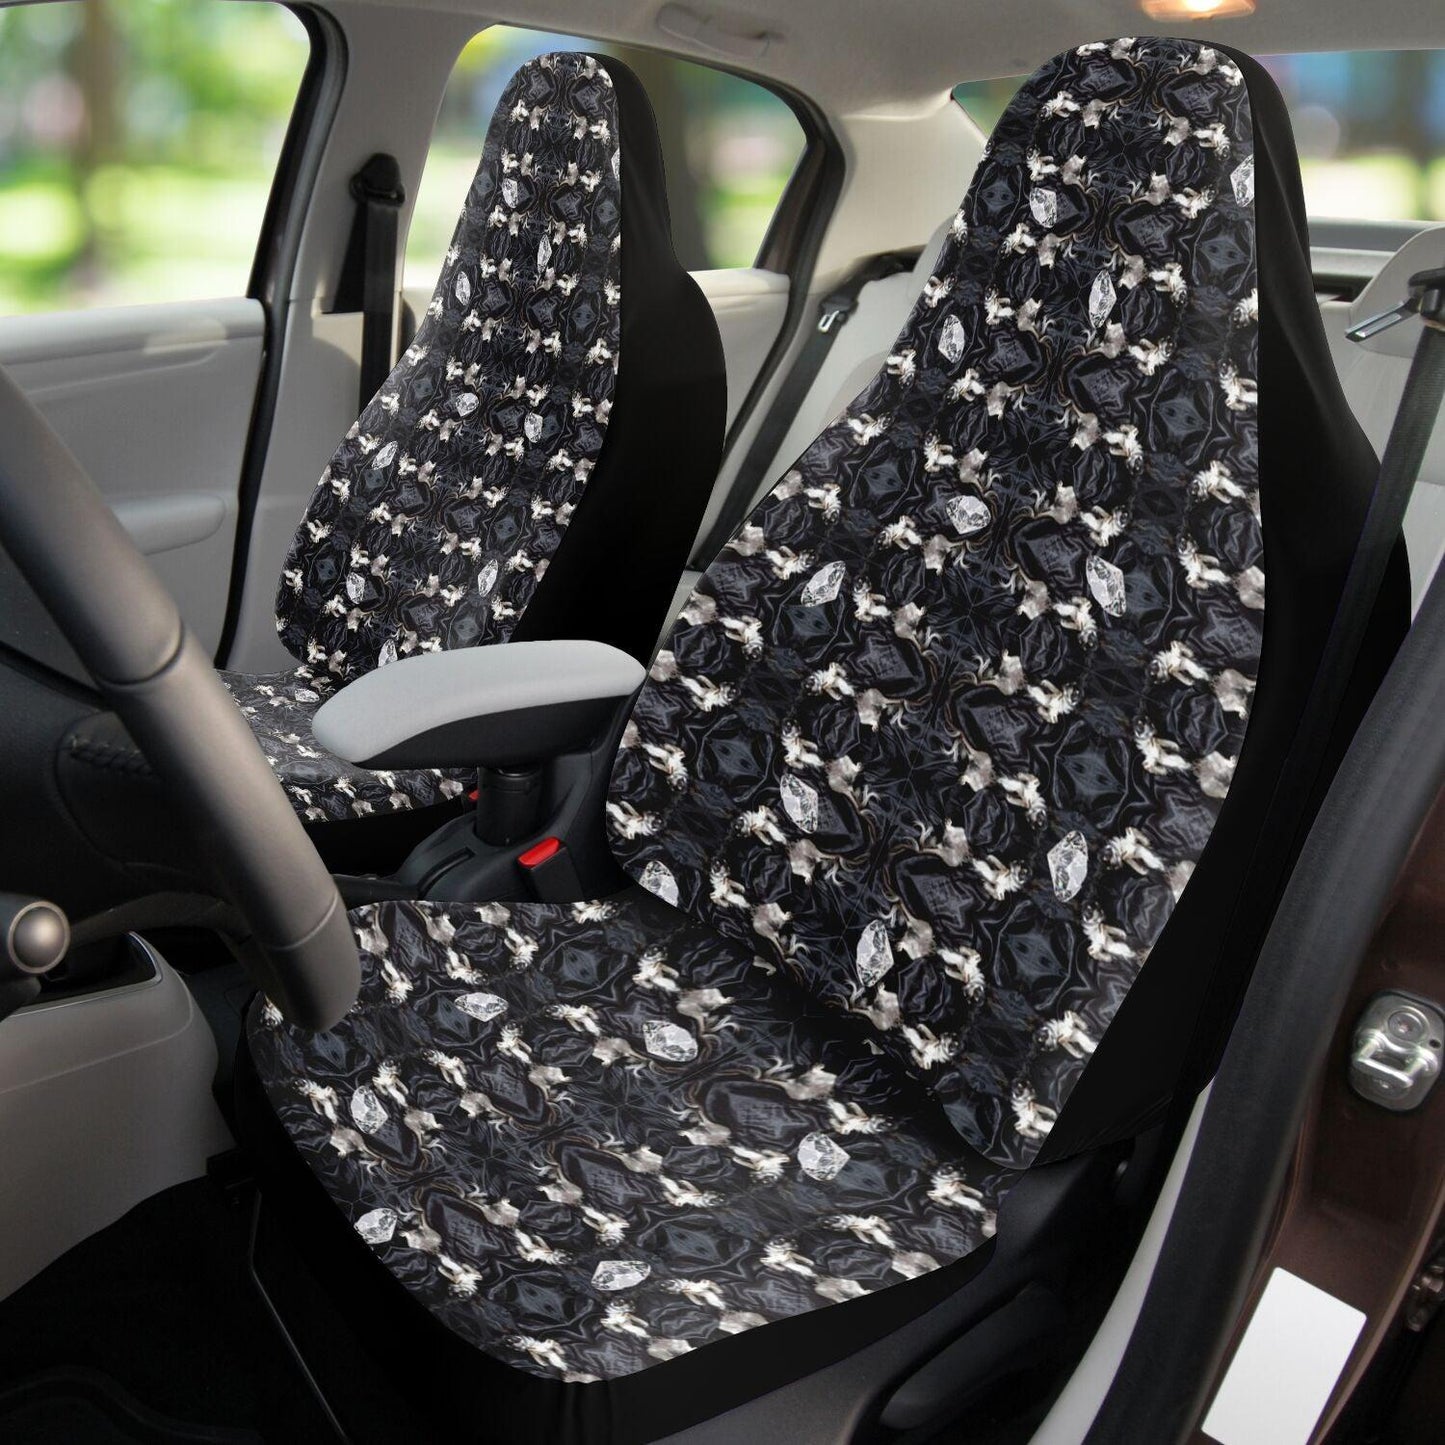 Chihuahuas and diamonds black and white art deco car seat covers for a stylish girl. Chimigos.com